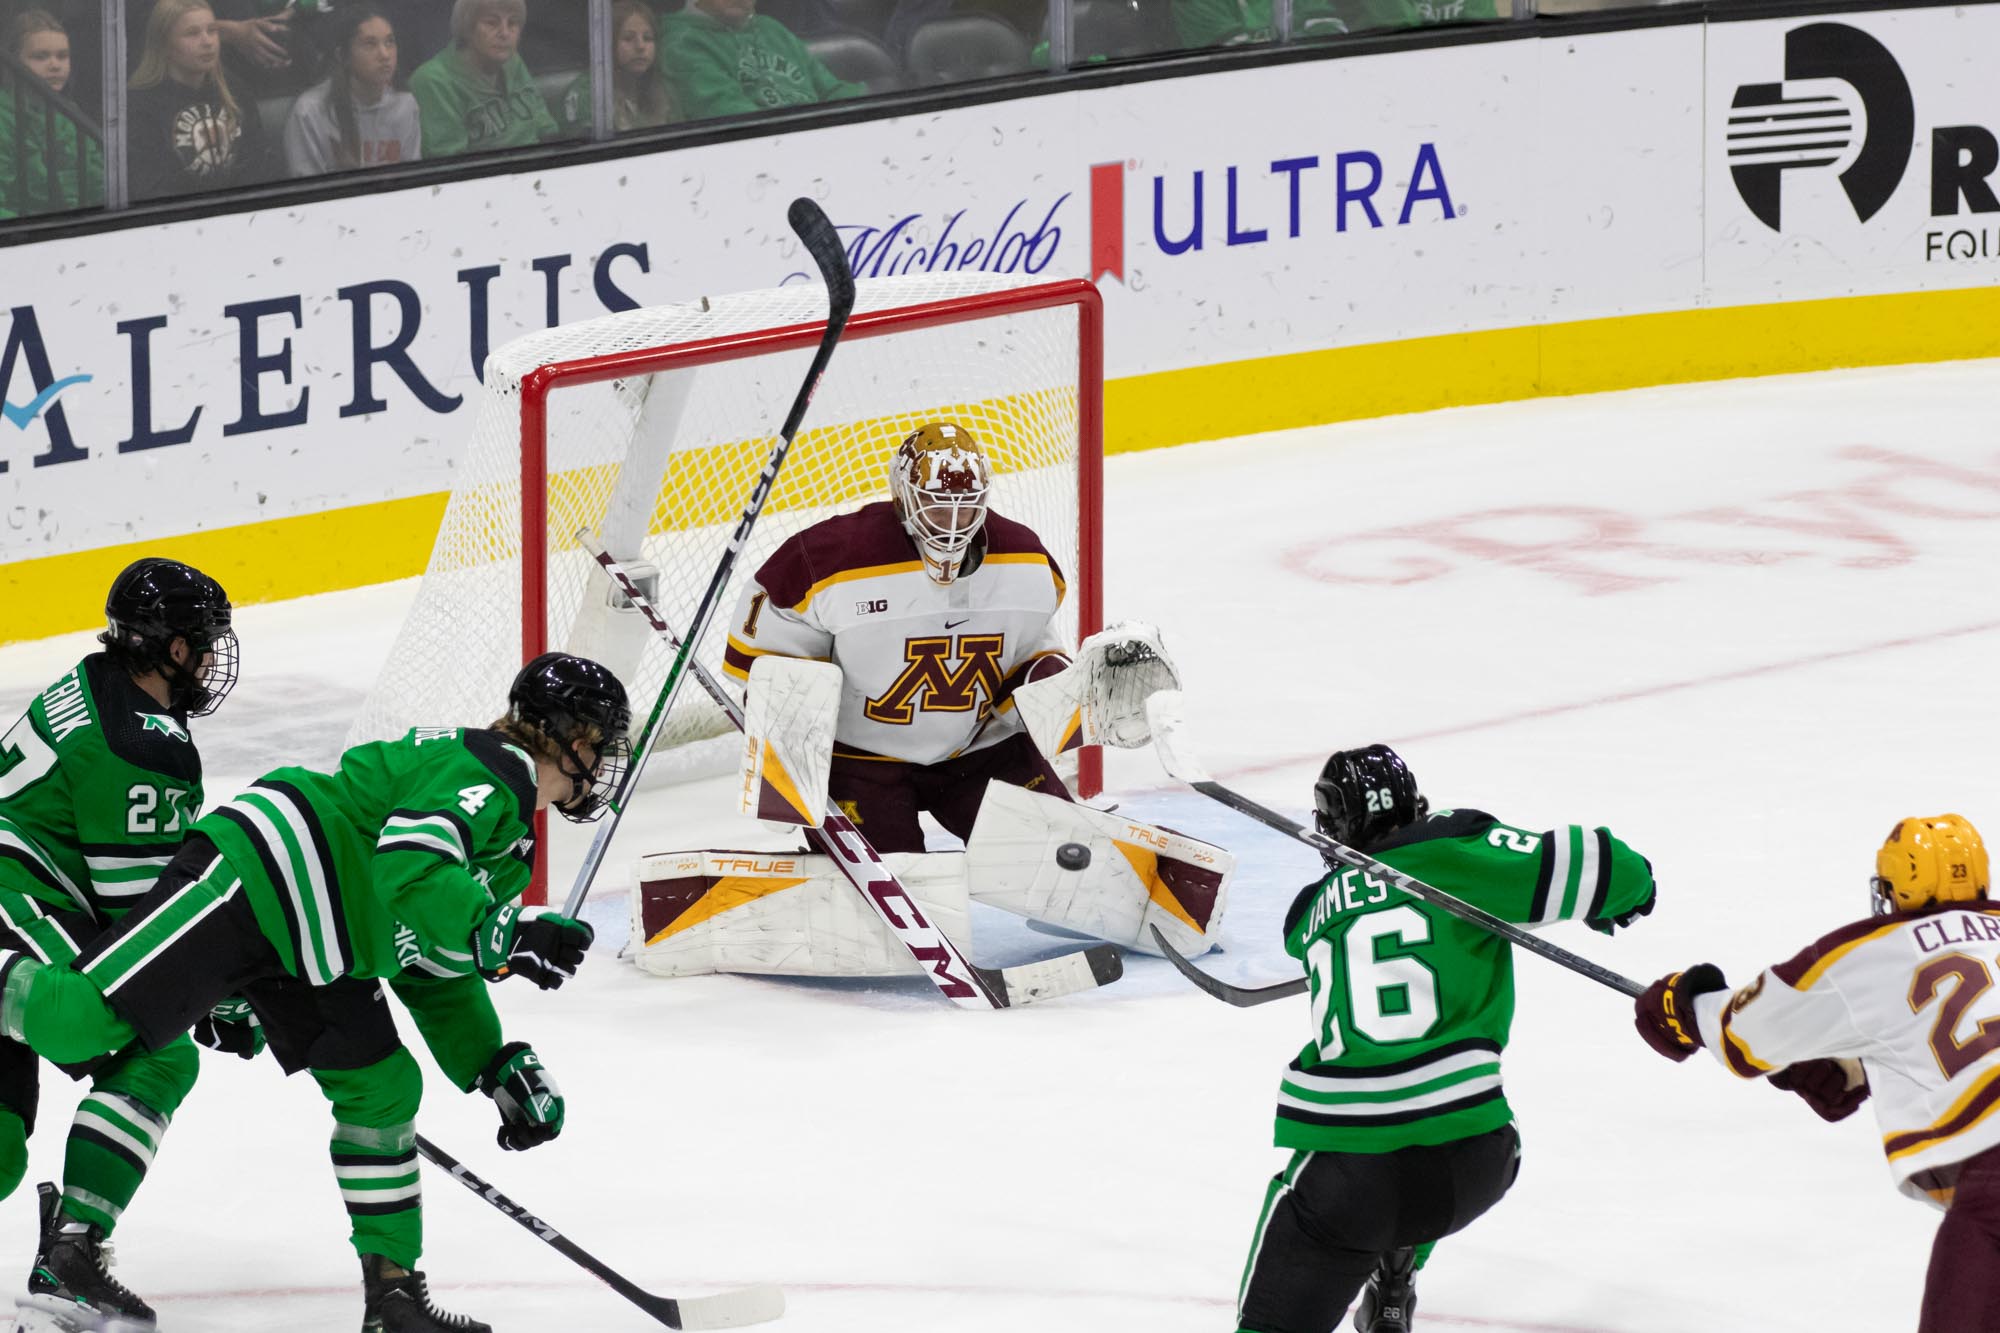 Justen Close makes the save against UND's James